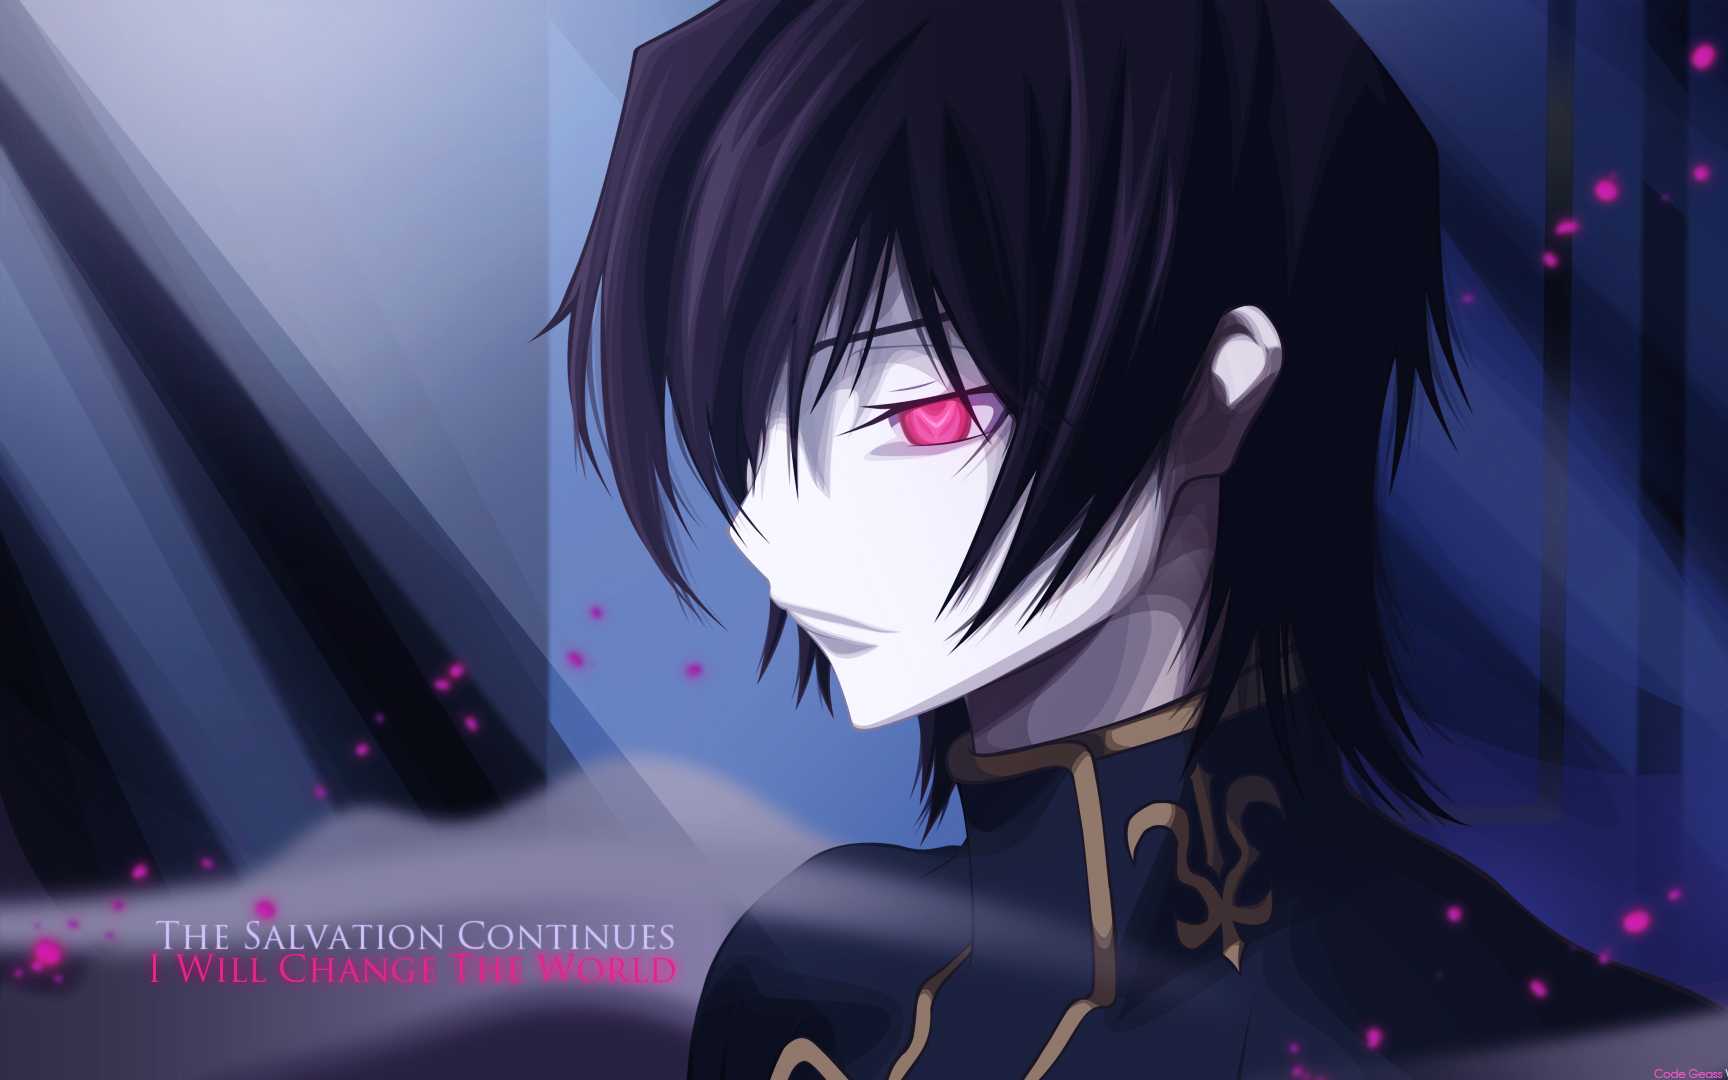 Stream CODE GEASS X LELOUCH HARDSTYLE by supersaiyanlifts